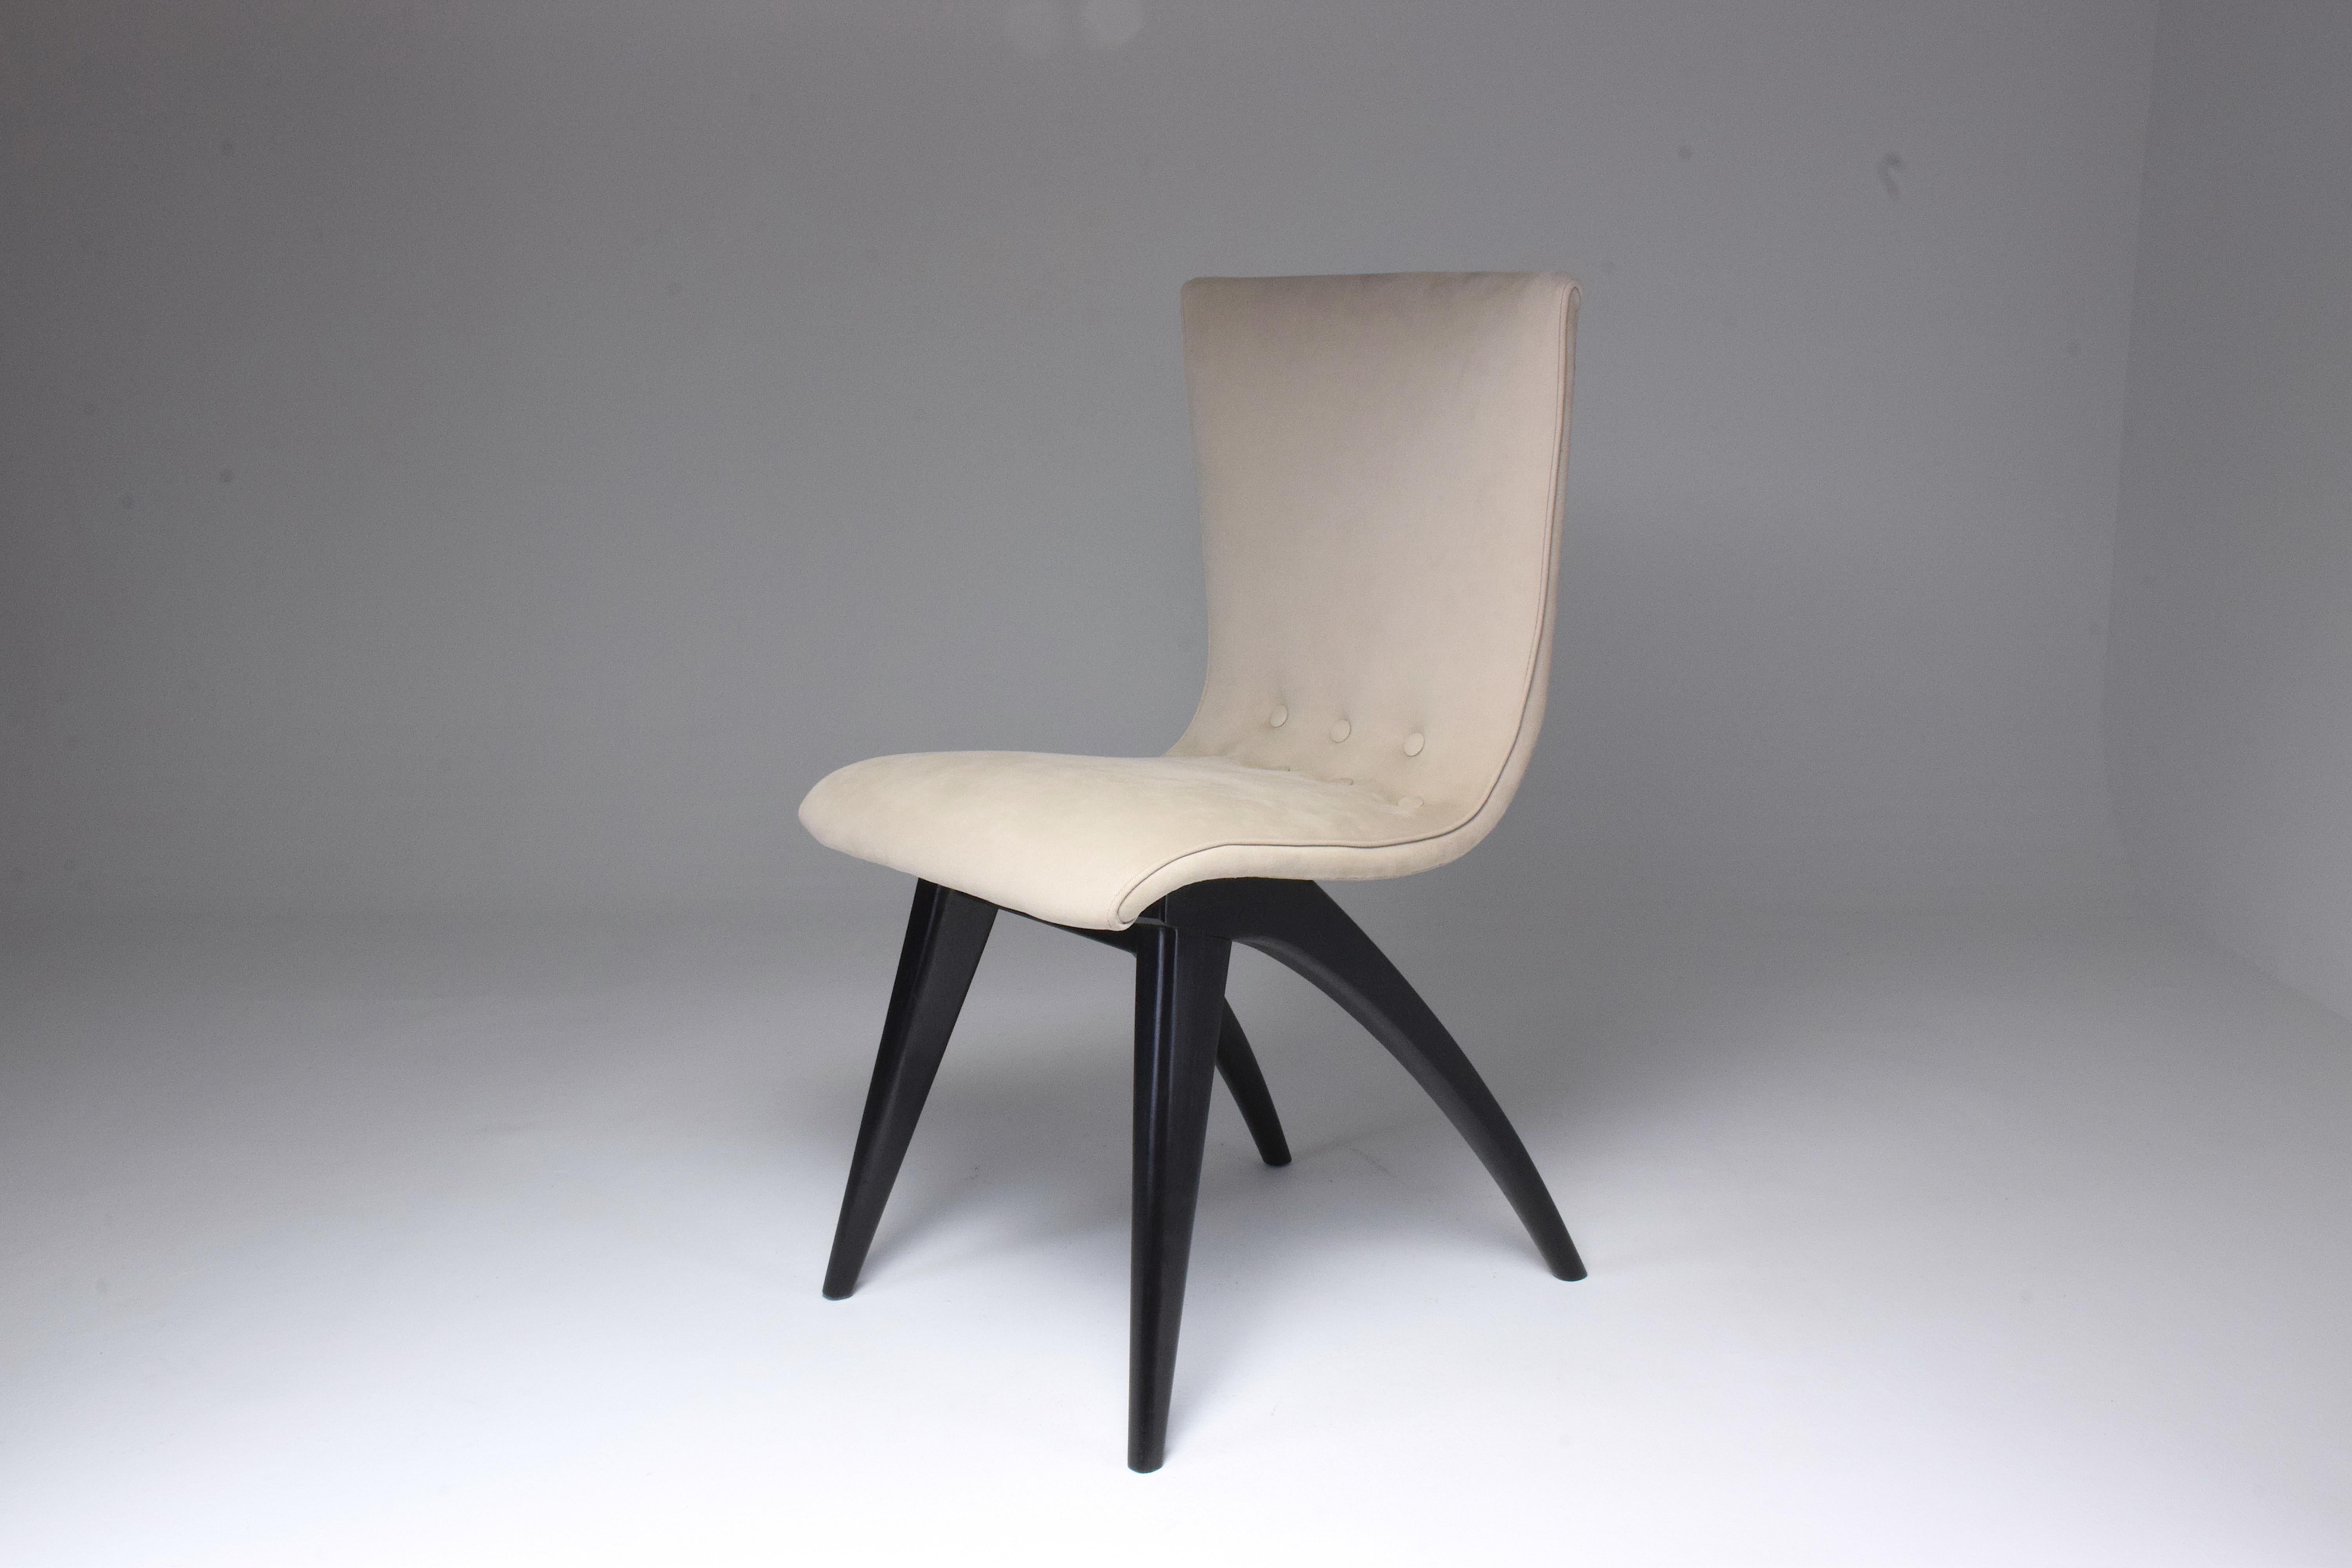 Upholstery Midcentury Scandinavian Dining Chairs by CJ Van Os Culemborg, Set of Four, 1950s